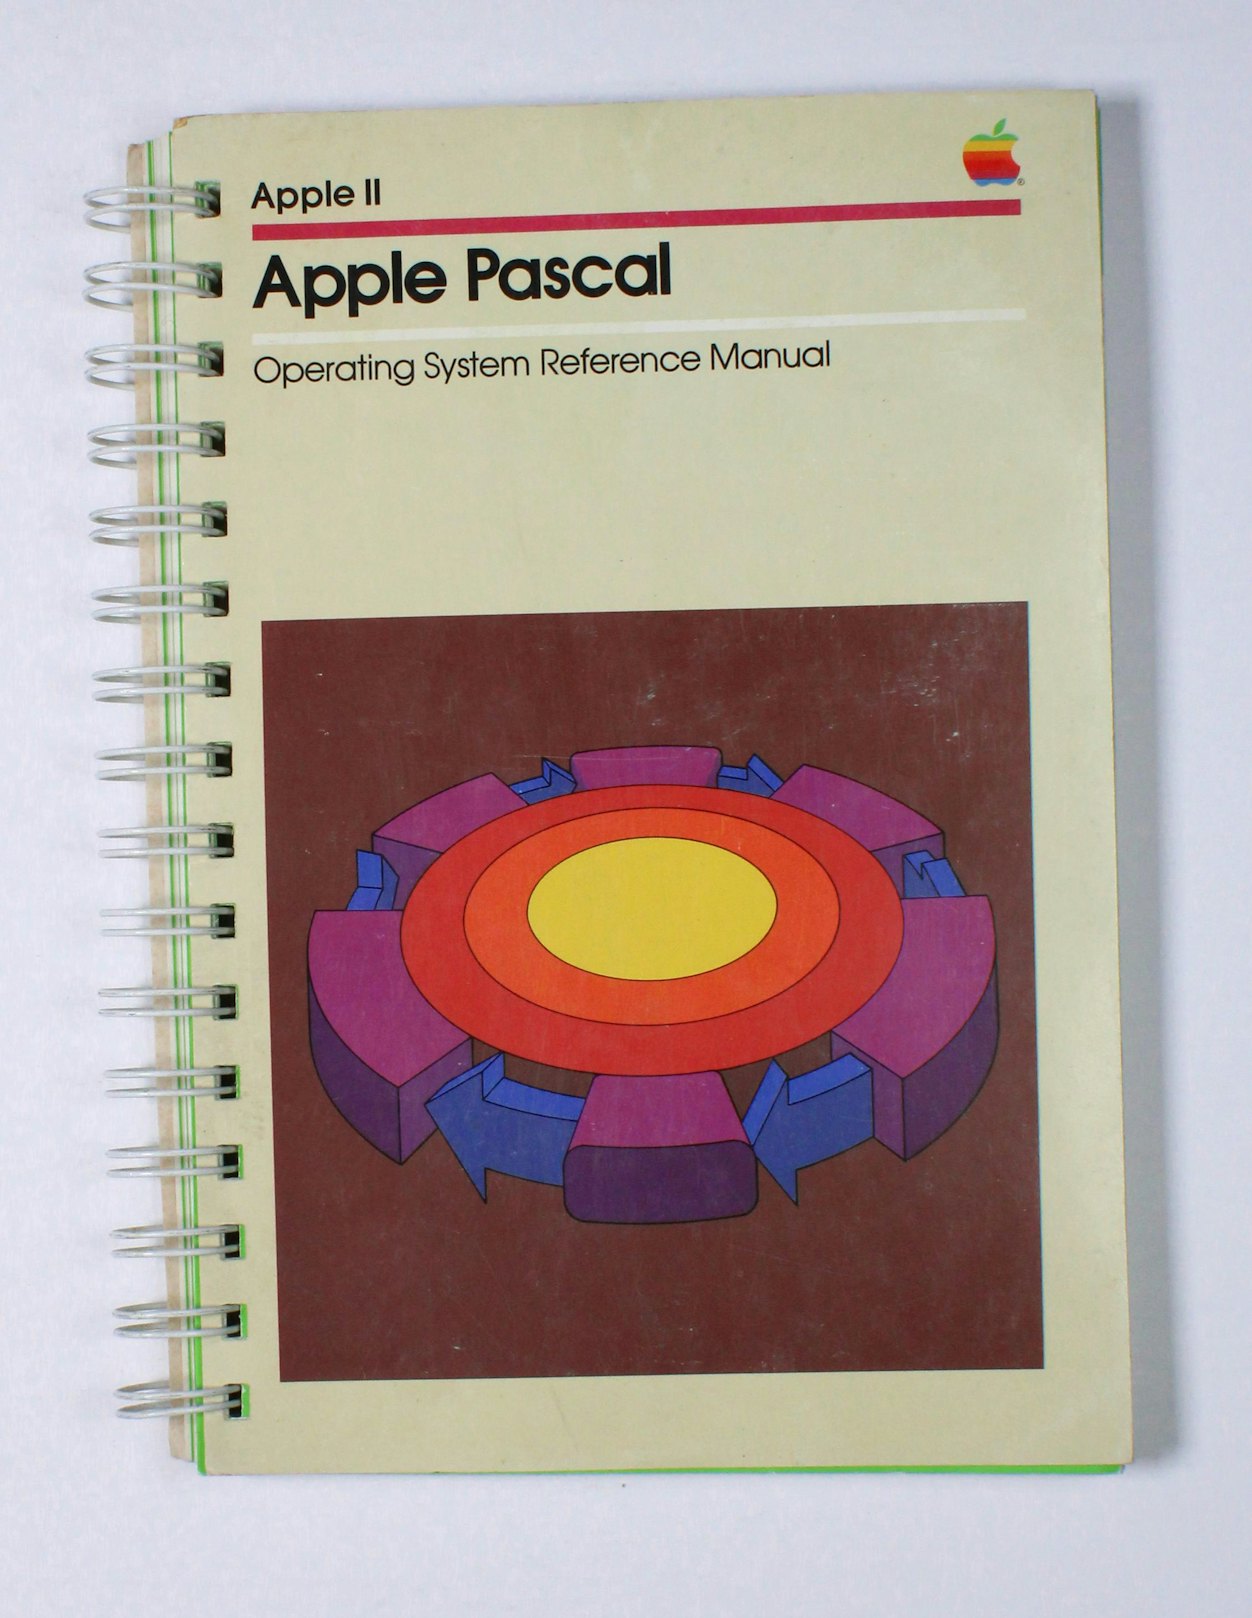 Apple Pascal Operating System Reference Manual for Apple II